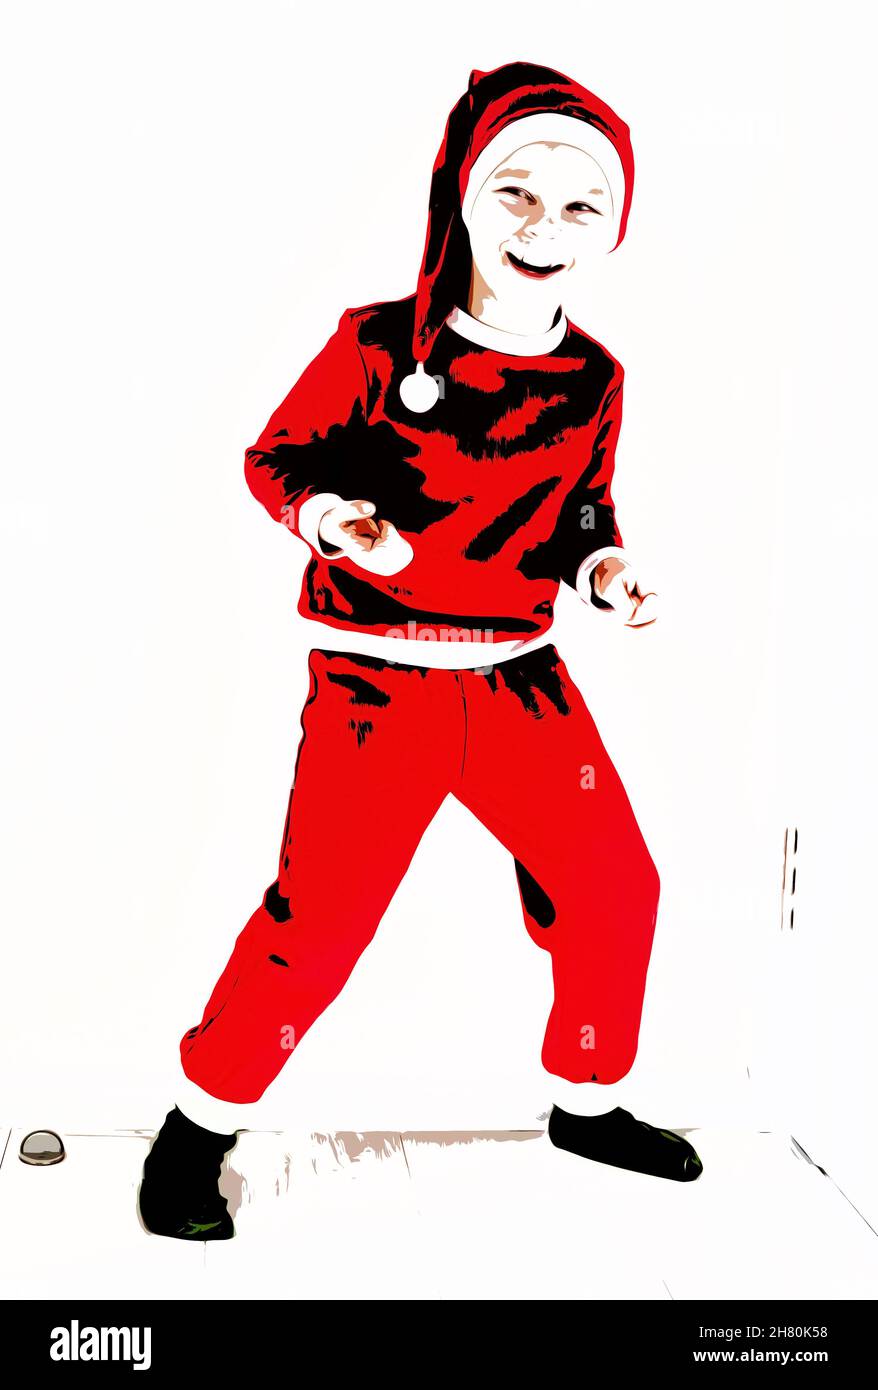 Illustration. Little boy in the form of a Santa Claus smiling, standing on a white background Stock Photo